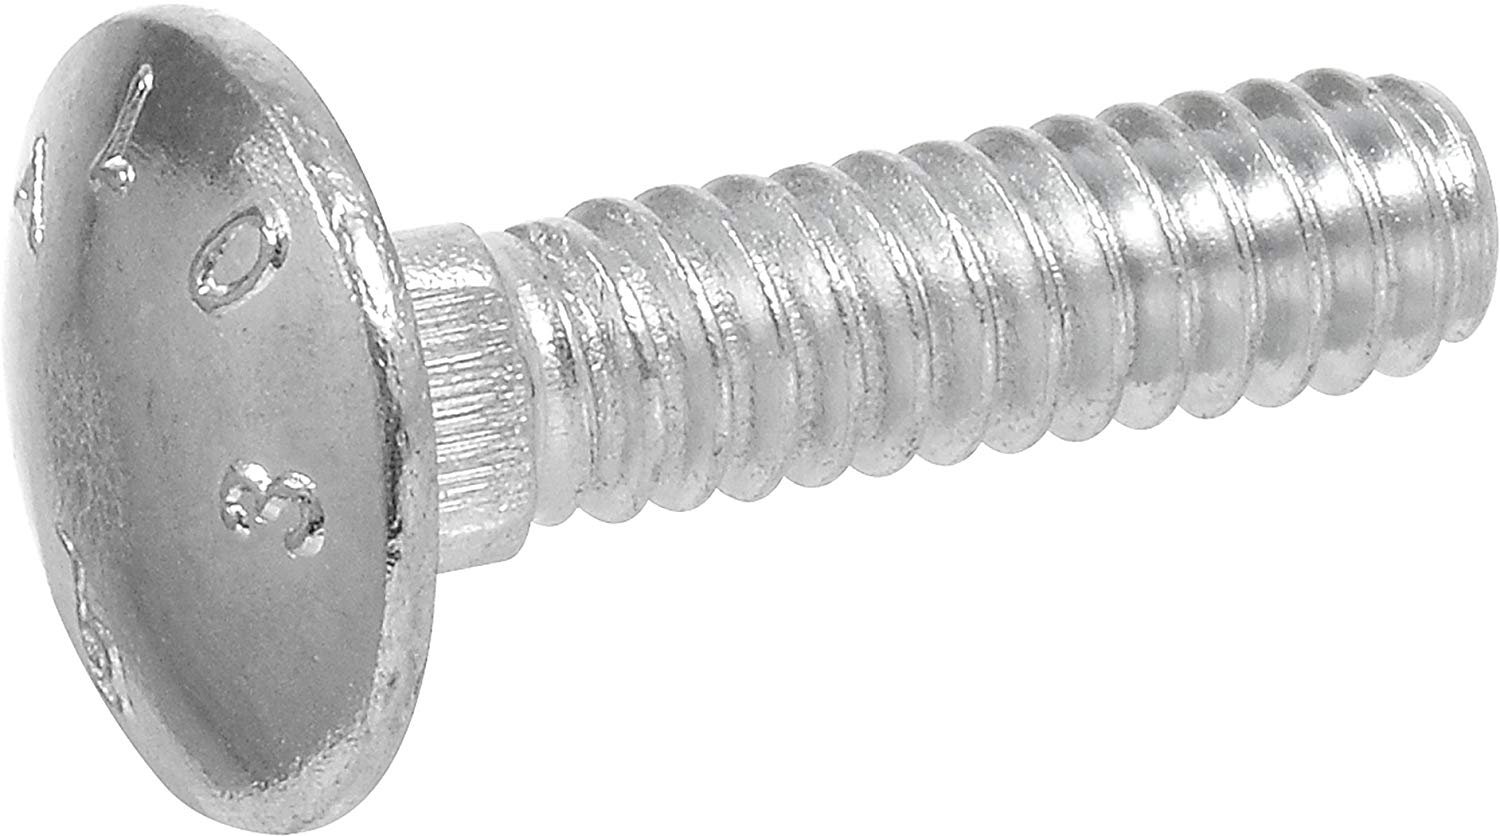 Hillman 240051 Carriage Bolt, 1/4 x 4-1/2-Inch, Steel, Zinc-Plated, Silver, 100-Pack - image 1 of 2